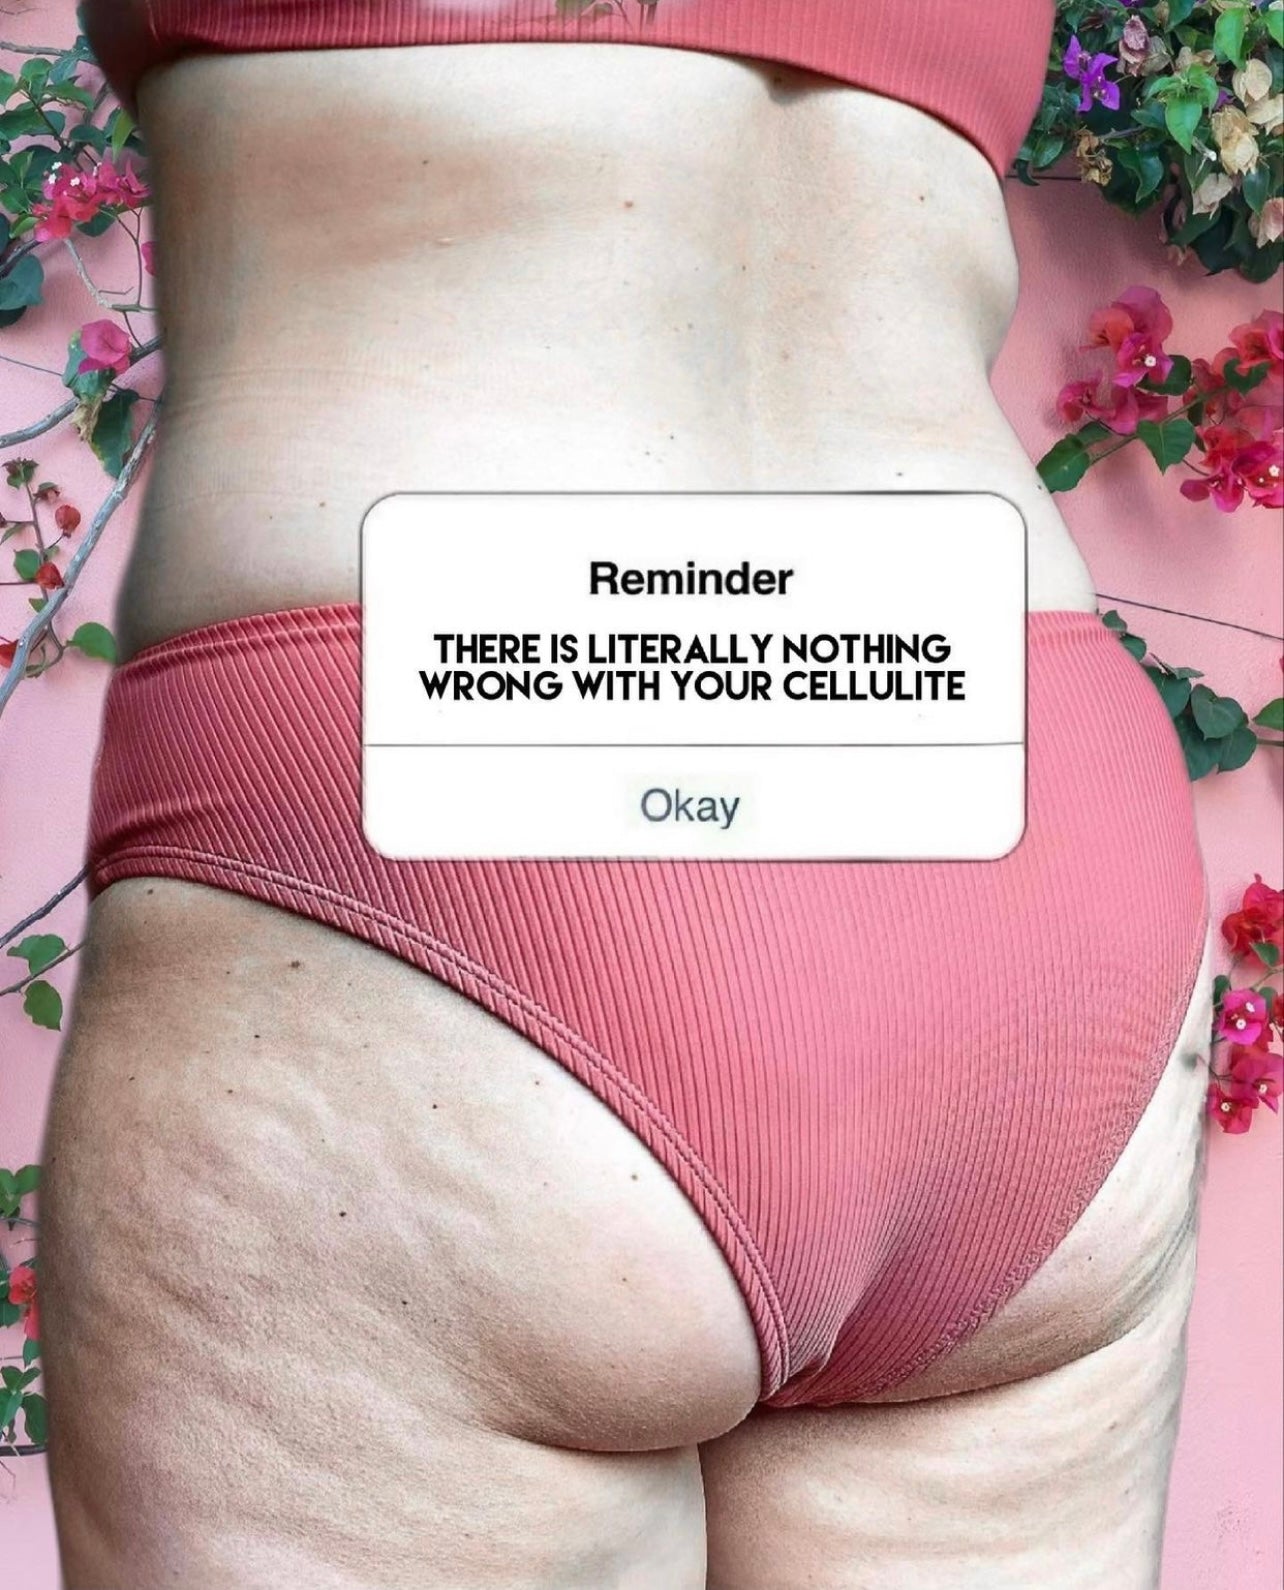 Question: How do you feel, truthfully, about your cellulite?